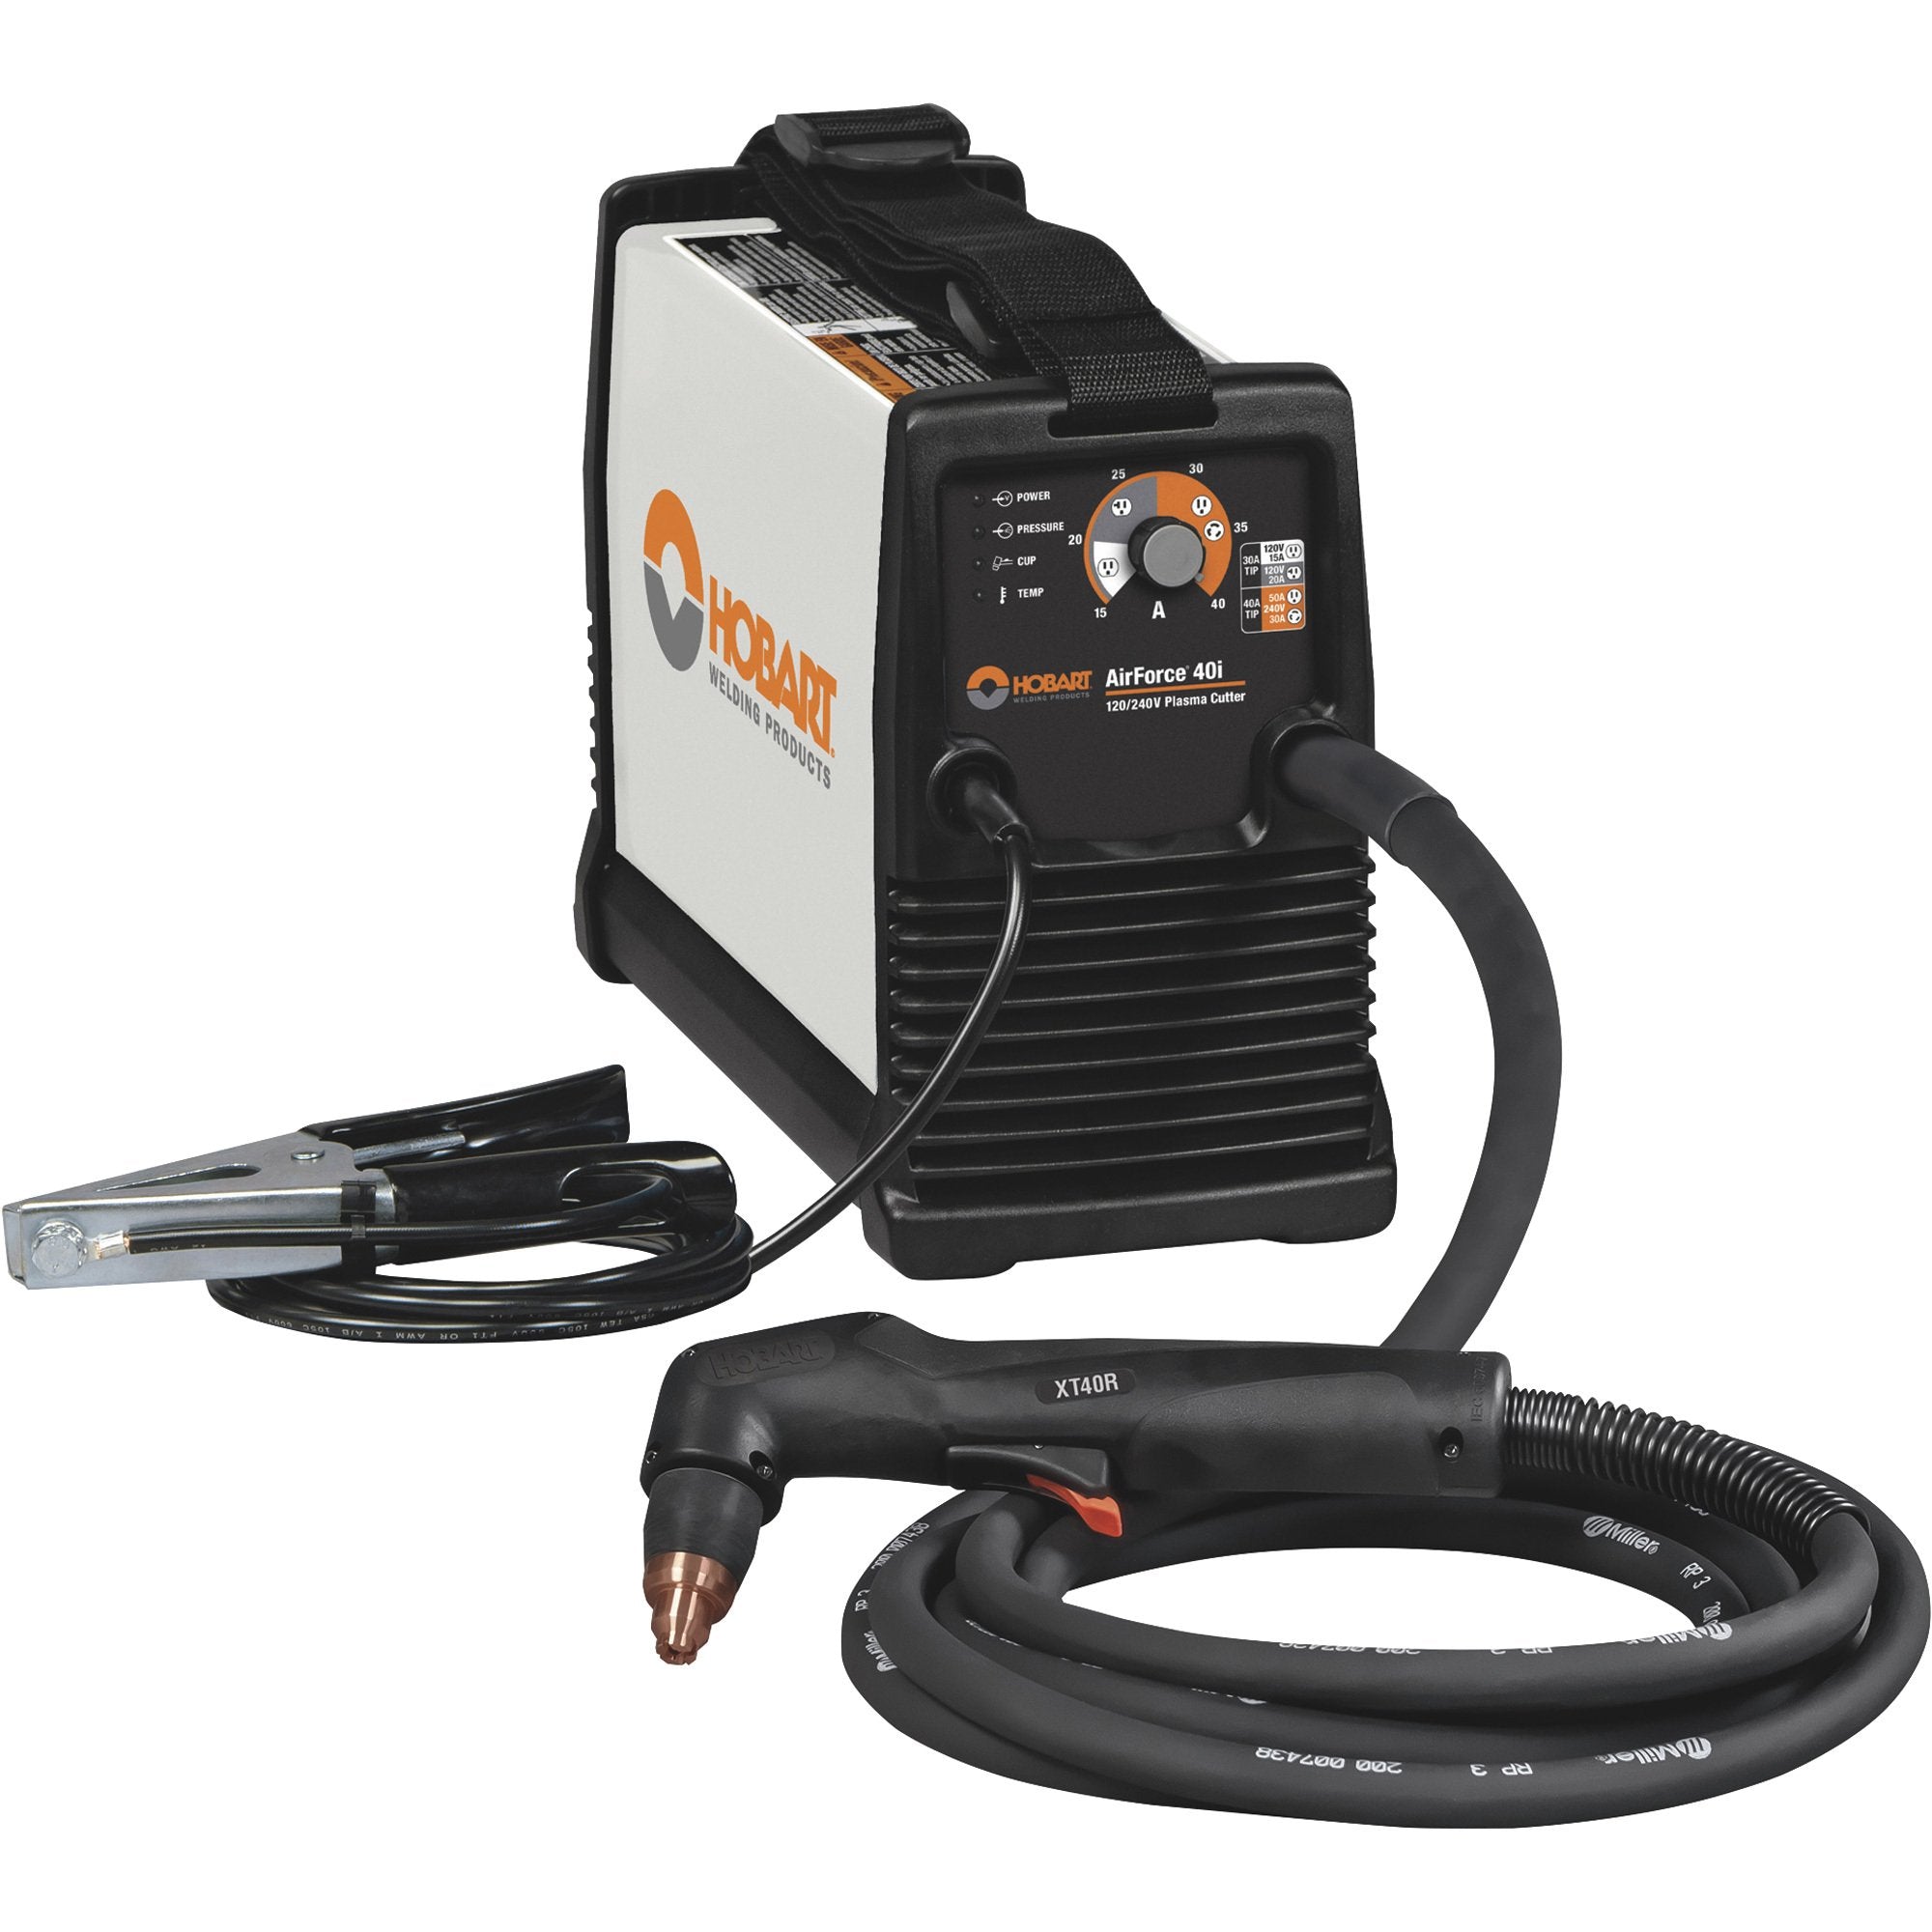 Hobart, Hobart 500575 Airforce 27i 120/240V Plasma Cutter with XT30R Torch and MVP Power Cord System New